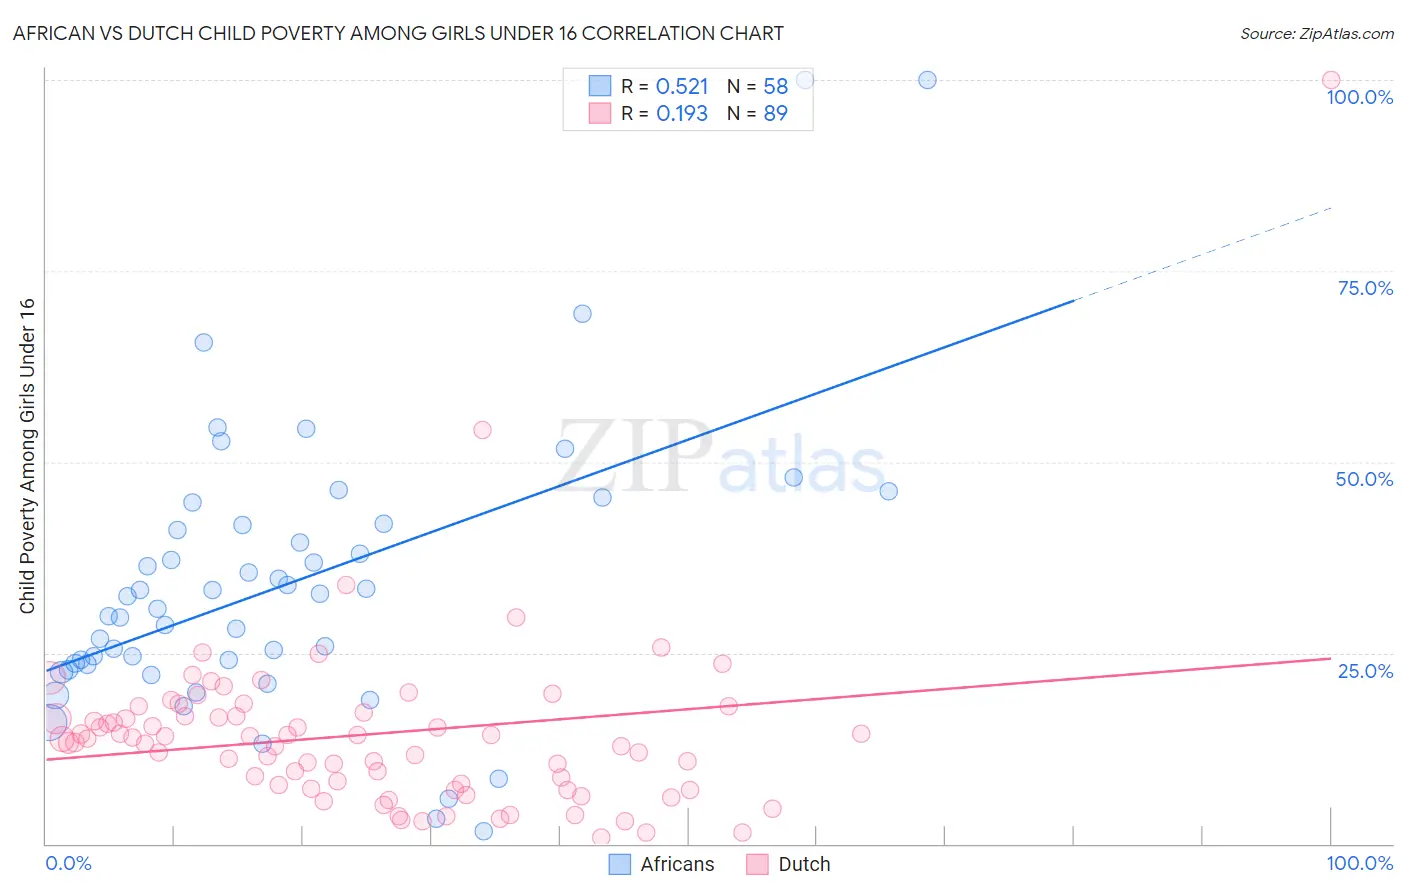 African vs Dutch Child Poverty Among Girls Under 16